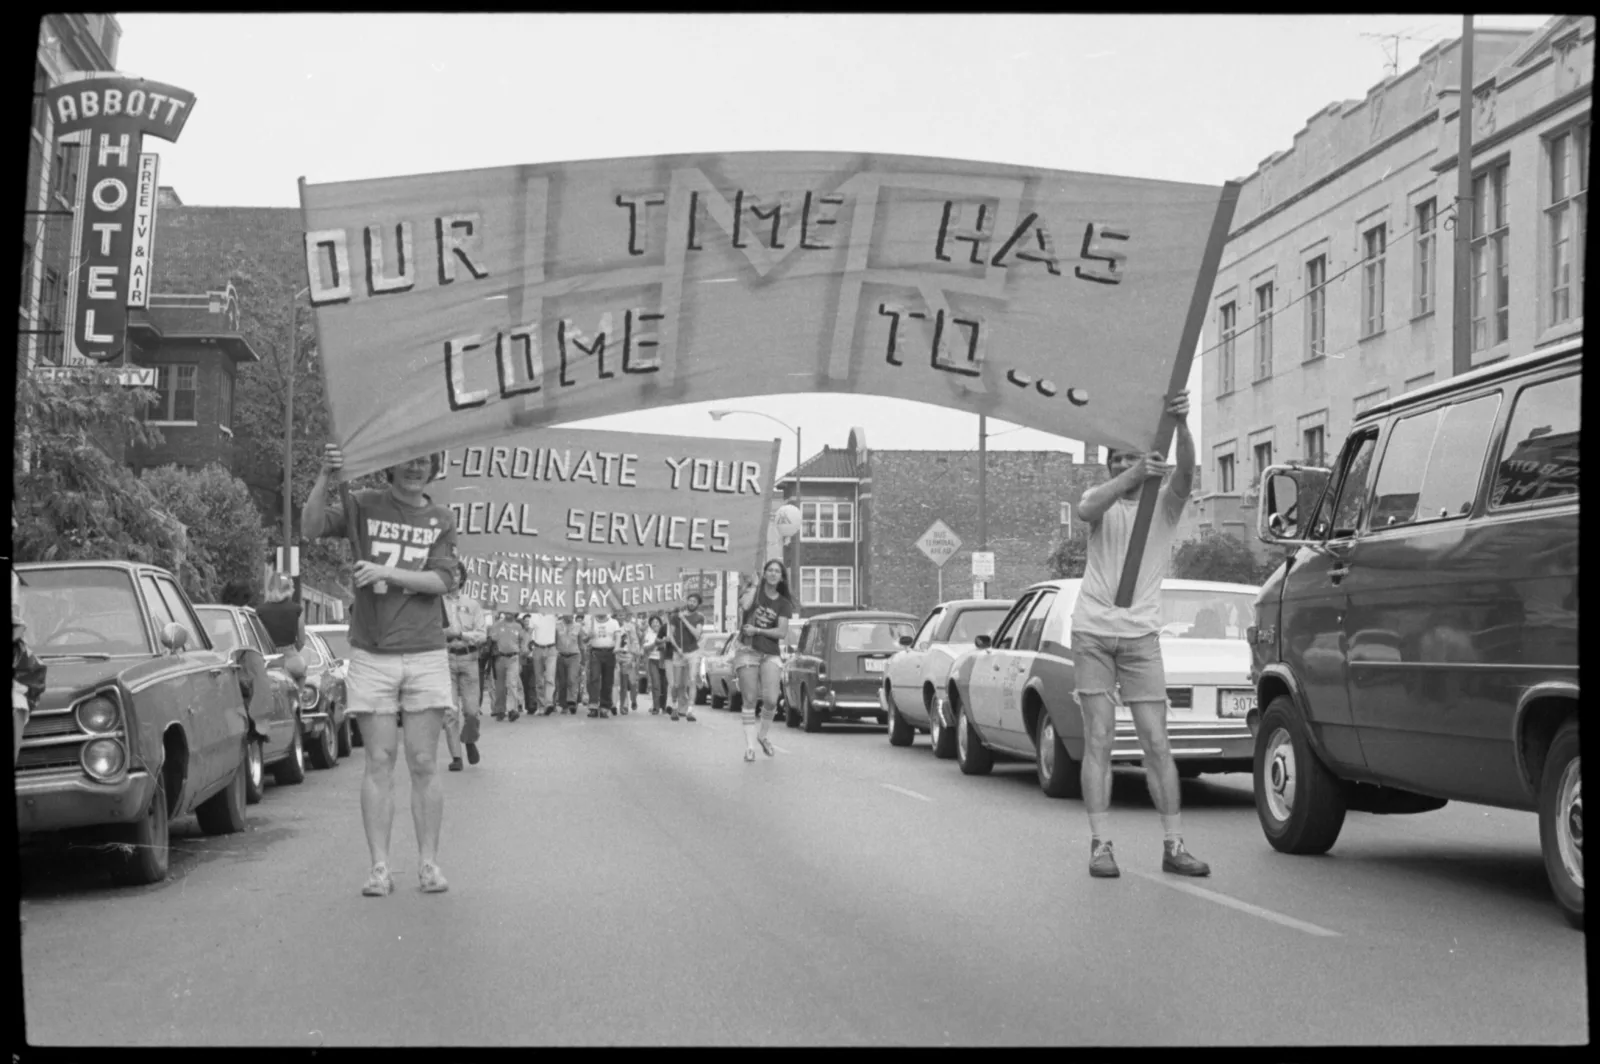 Two people holding up a sign in a parade. The sign reads, "Our time has come to..."